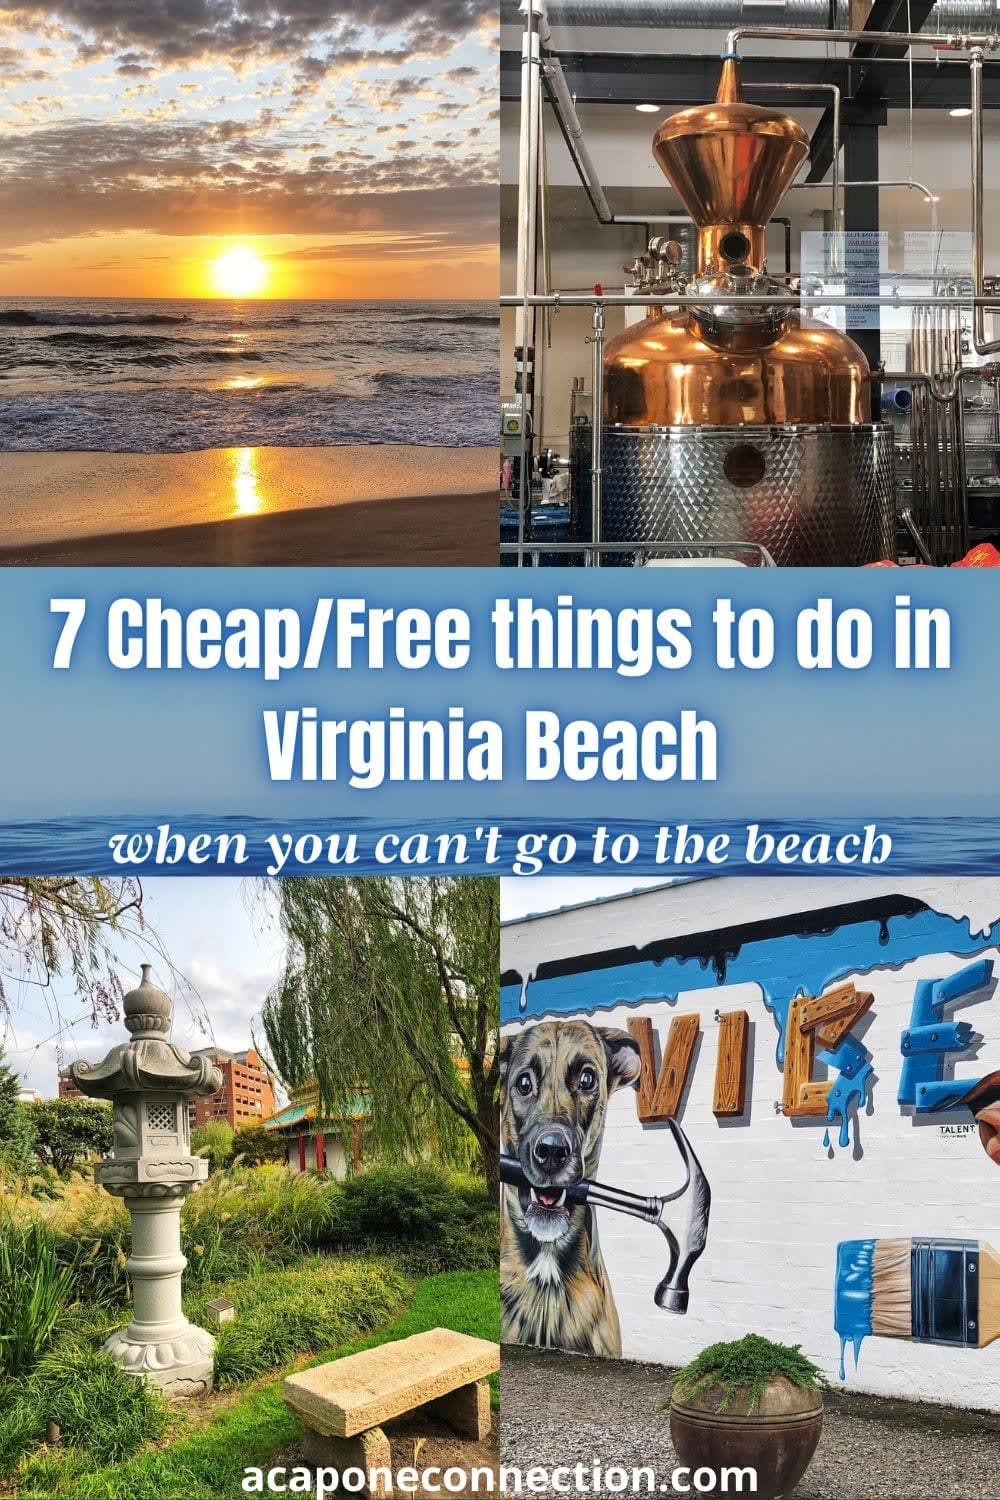 7 Cheap or Free Things to do in Virginia Beach When you Can't go to the Beach